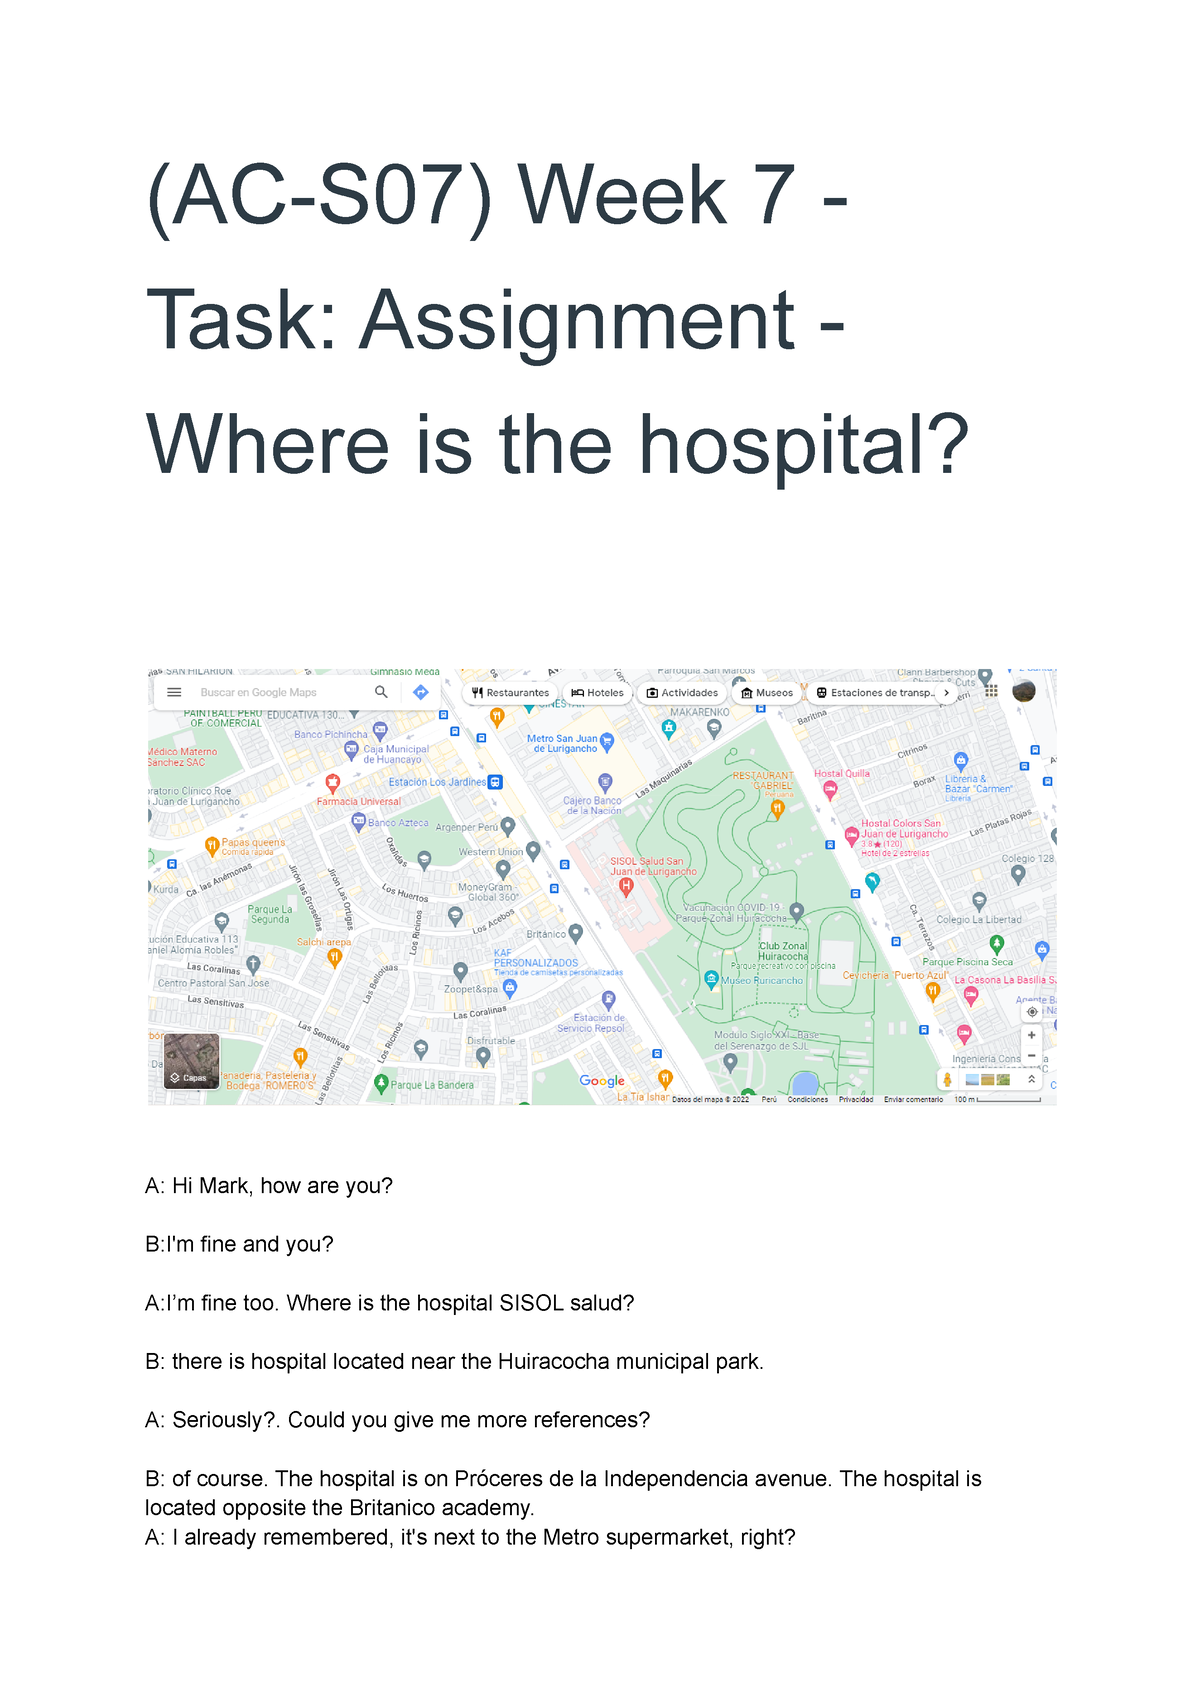 week 7 task assignment where is the hospital.pdf